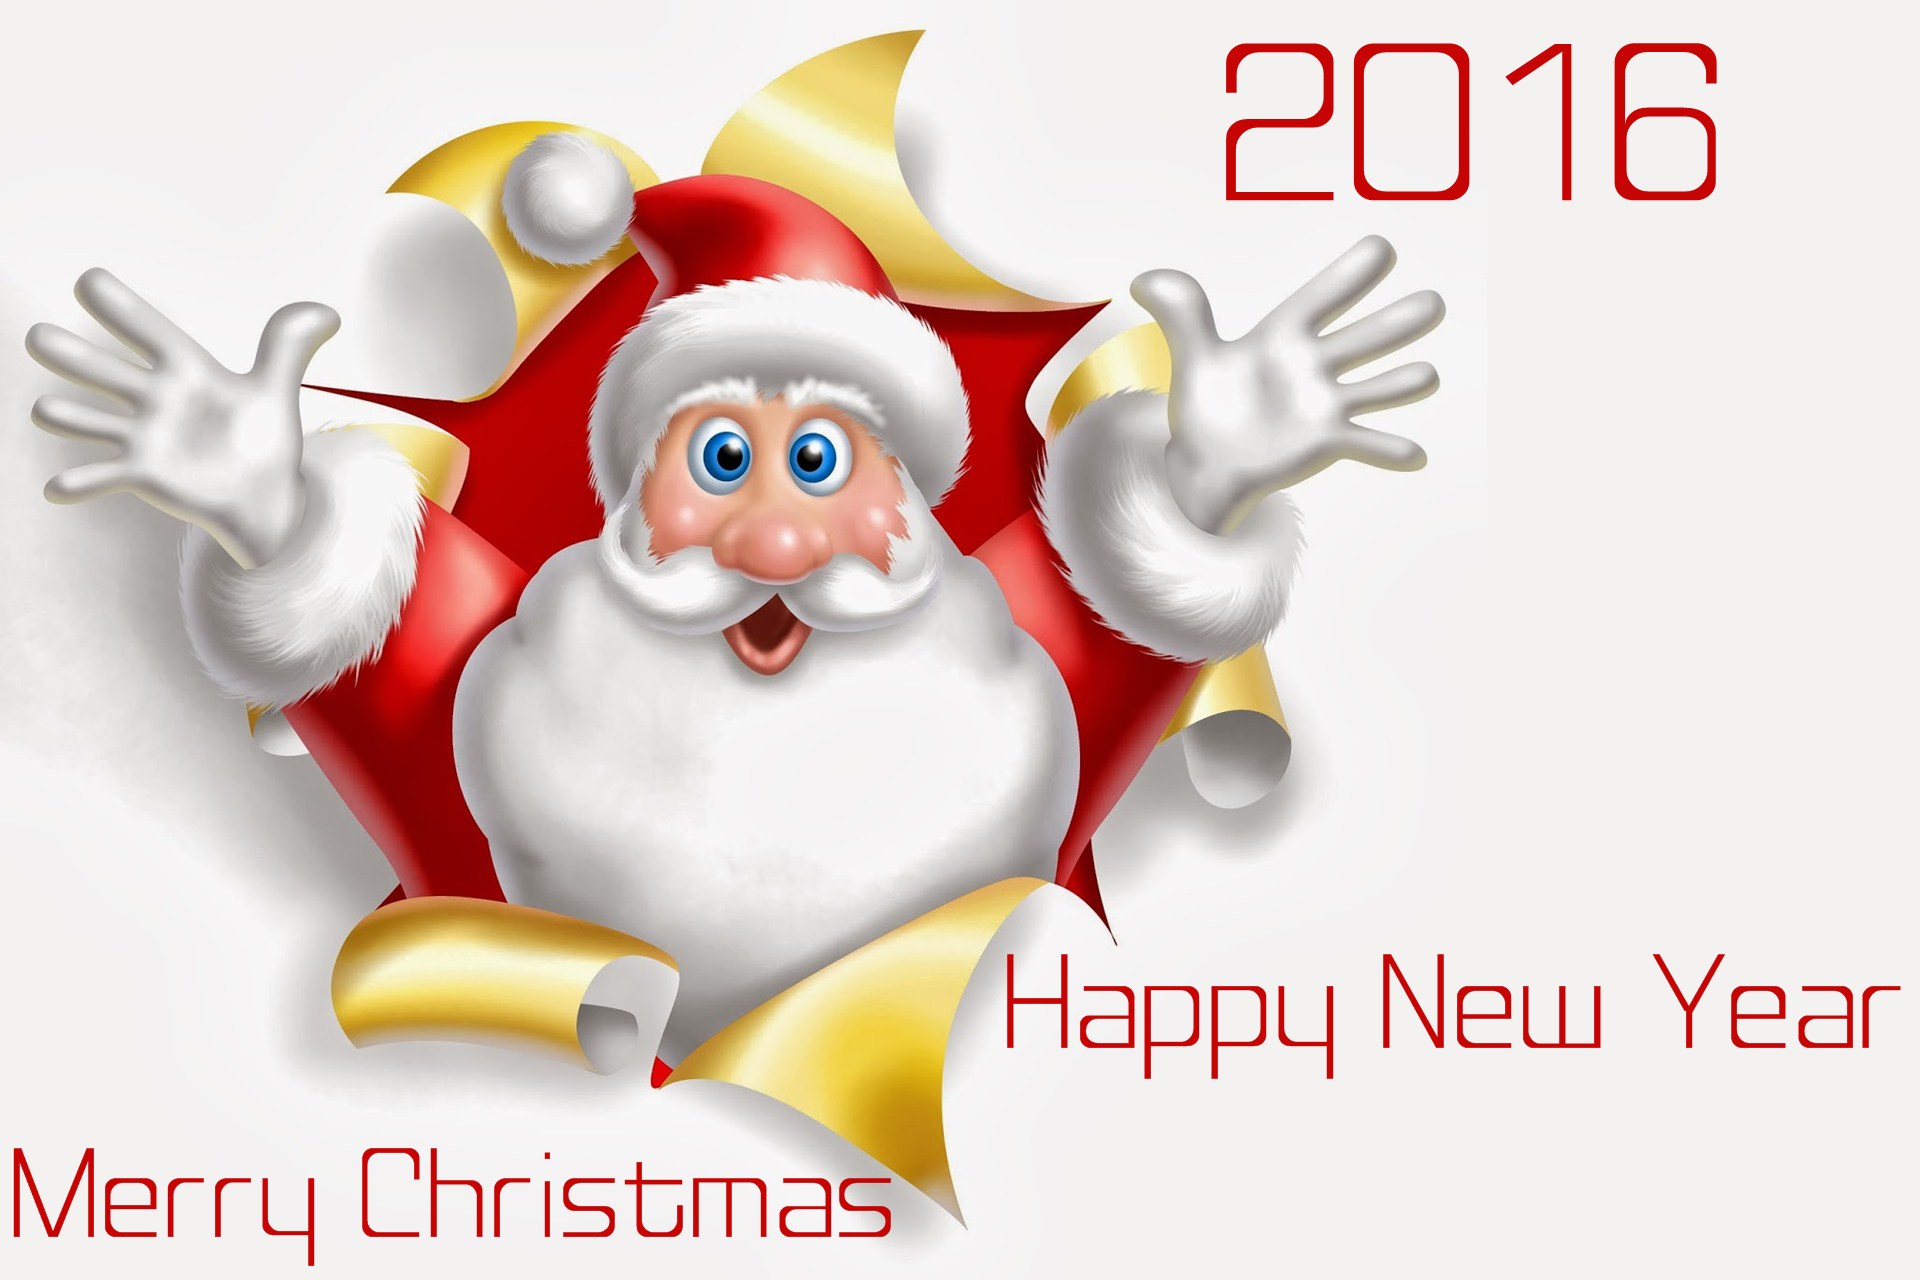 Santa Claus Wishes You Happy New Year 2016